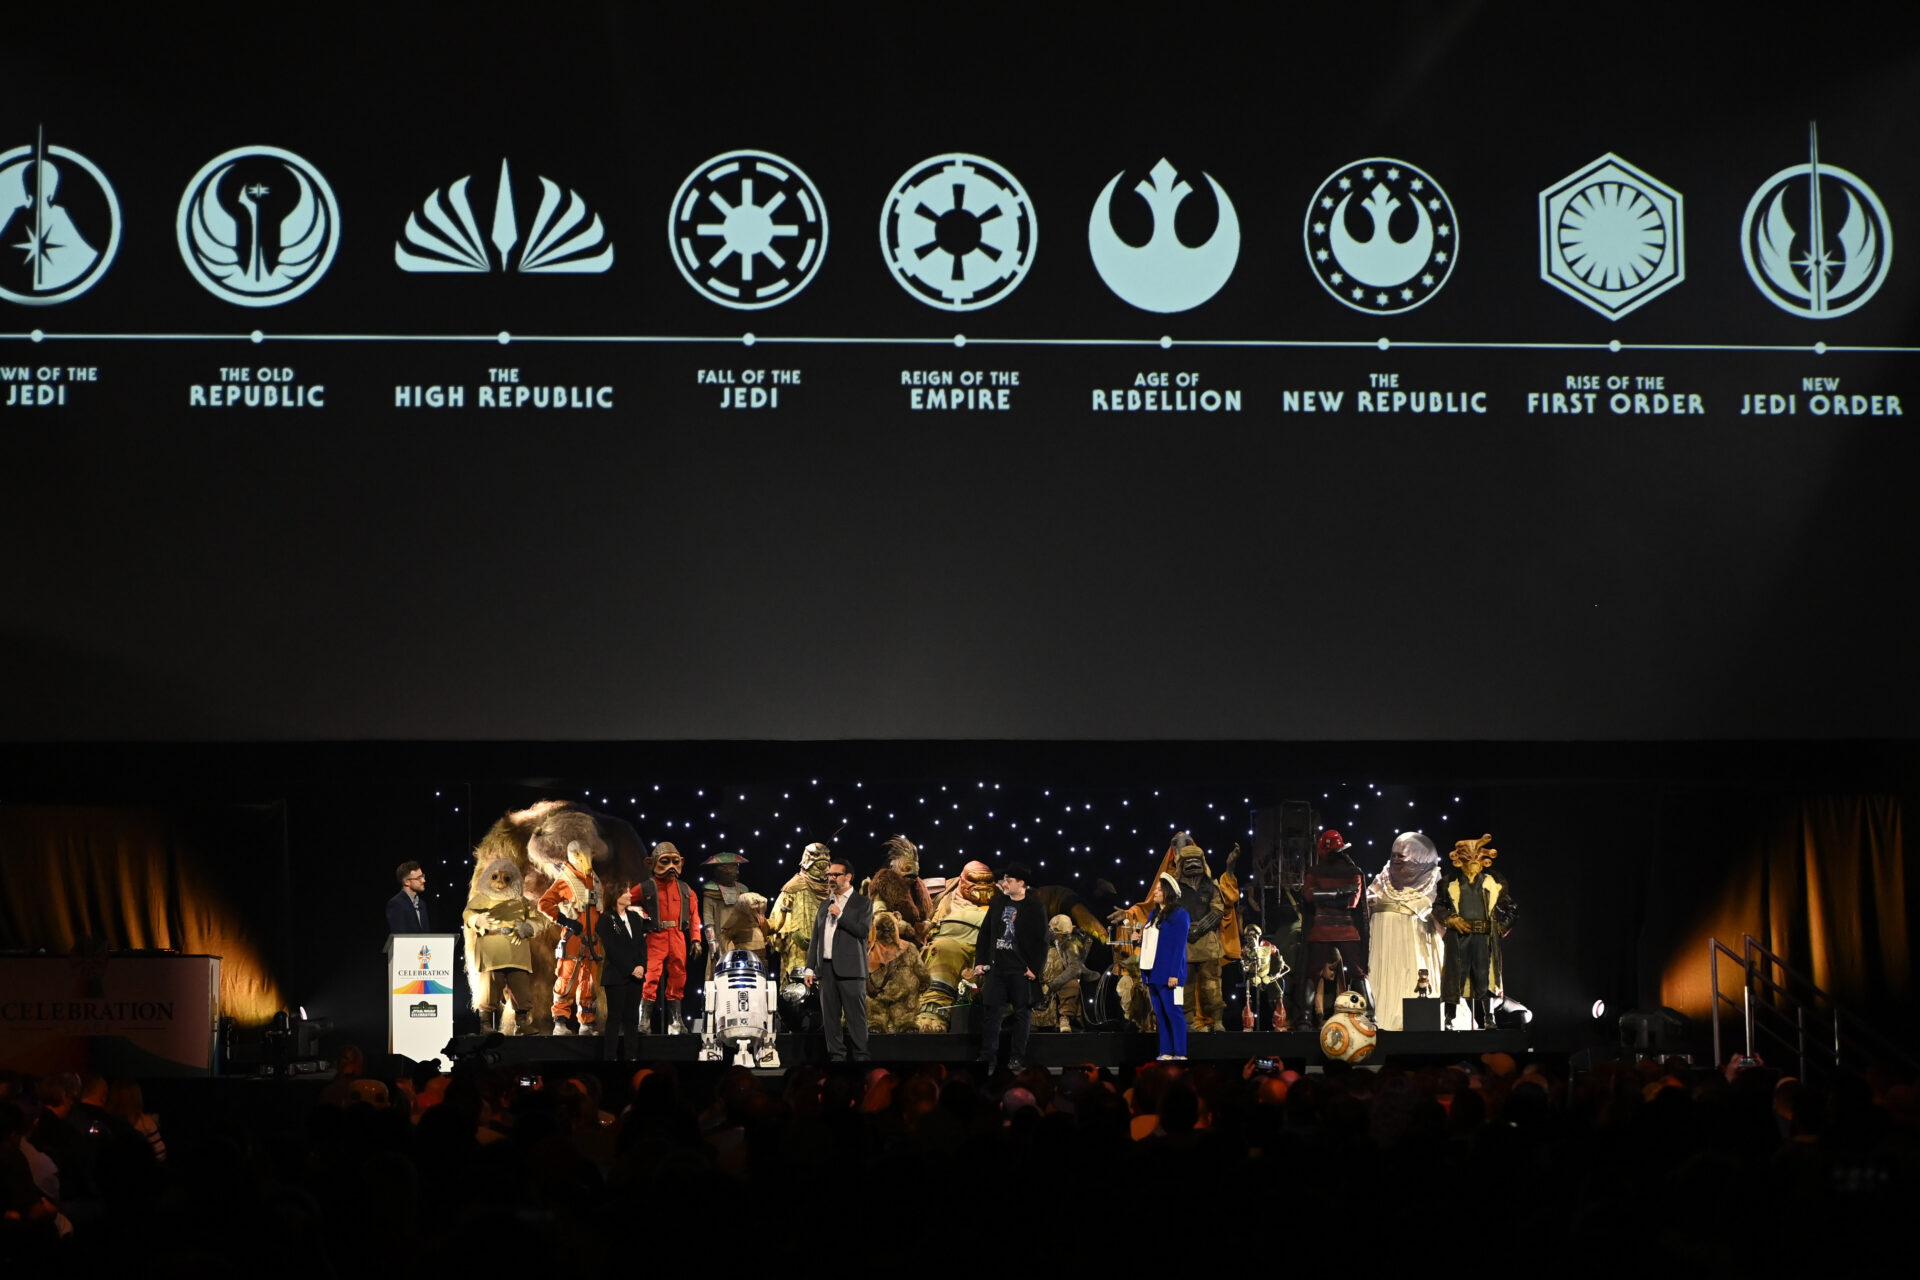 STAR WARS CELEBRATION CONQUERS LONDON WITH EXCITING SNEAK PREVIEWS OF NEW AND ACCLAIMED SERIES AND FEATURE FILMS—PLUS MAJOR BREAKING NEWS